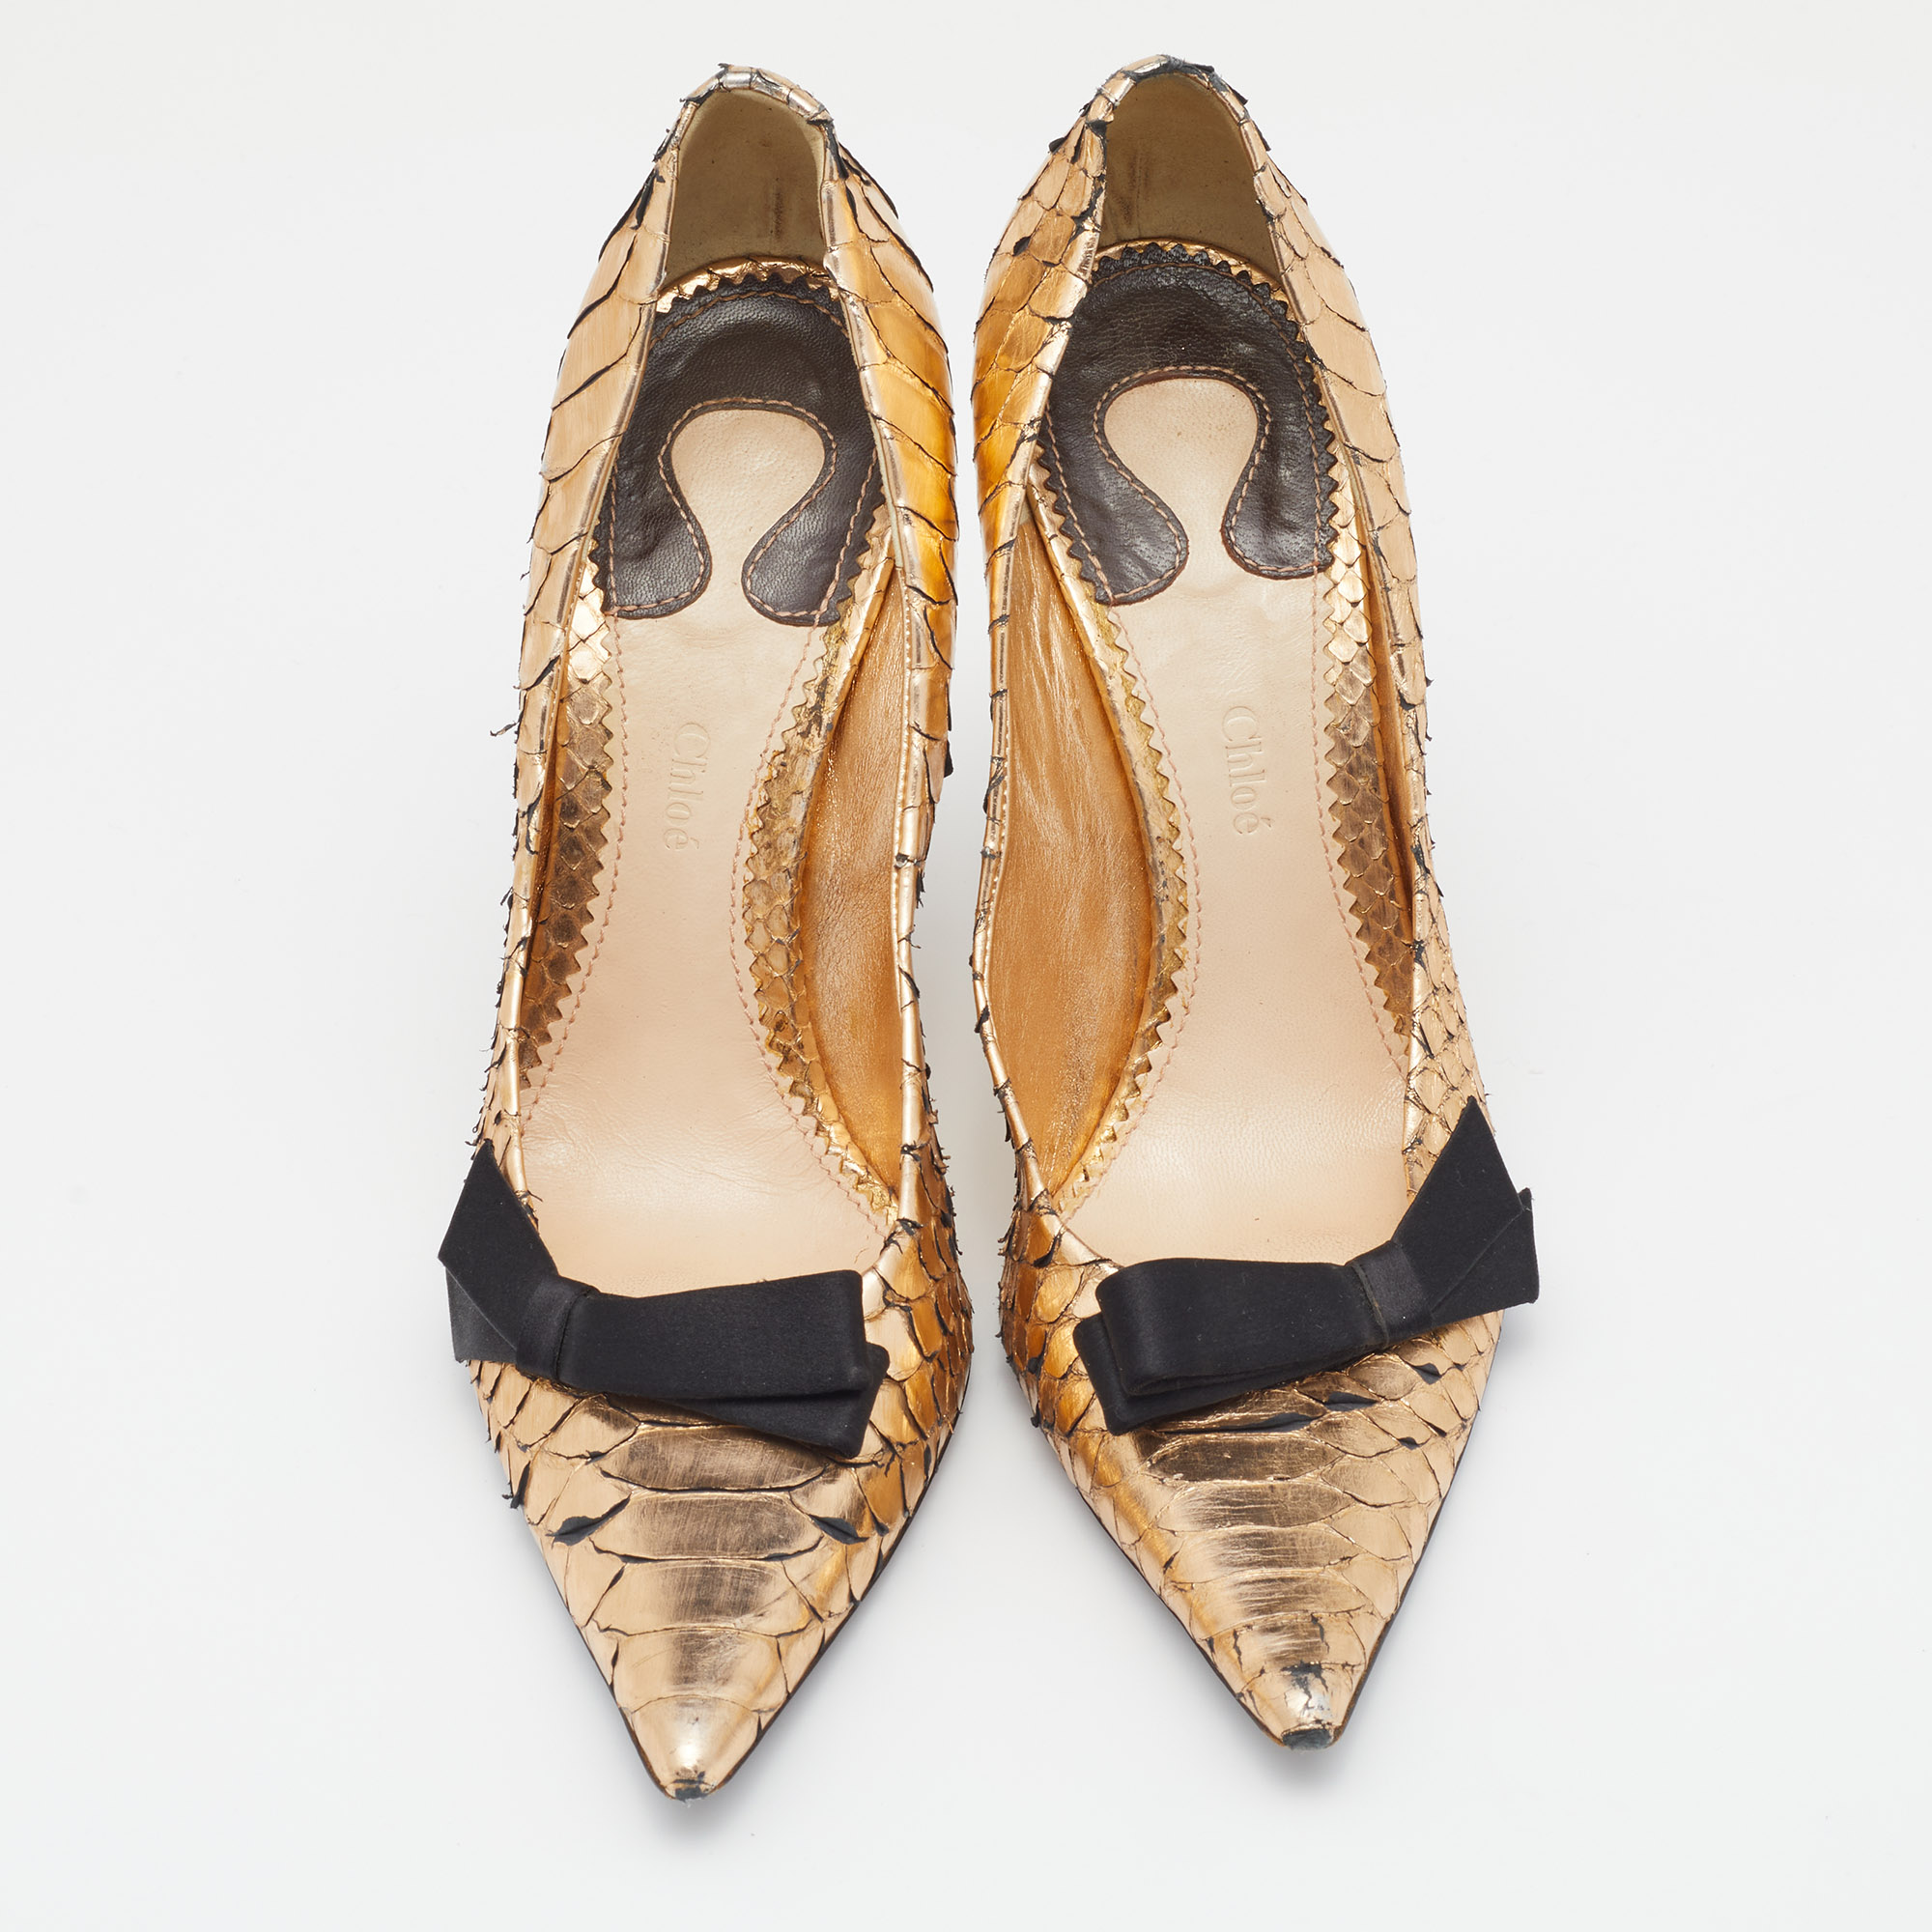 Chloe Metallic Gold Python Leather Bow Detail Pointed Toe Pumps Size 38.5